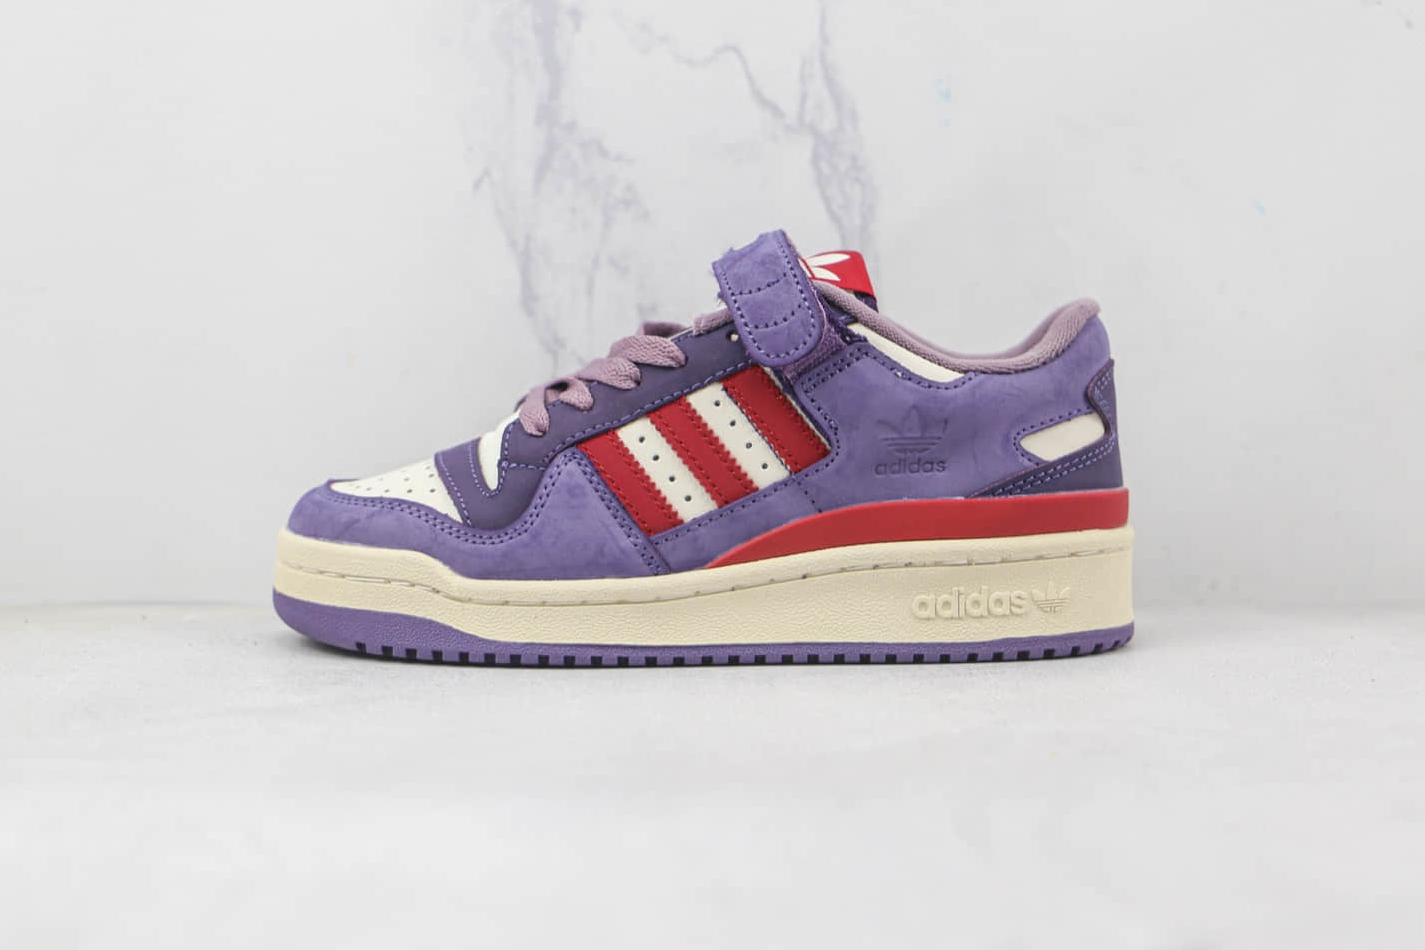 Adidas Forum 84 Low GX4540 - Retro-Inspired Sneakers | Free Shipping